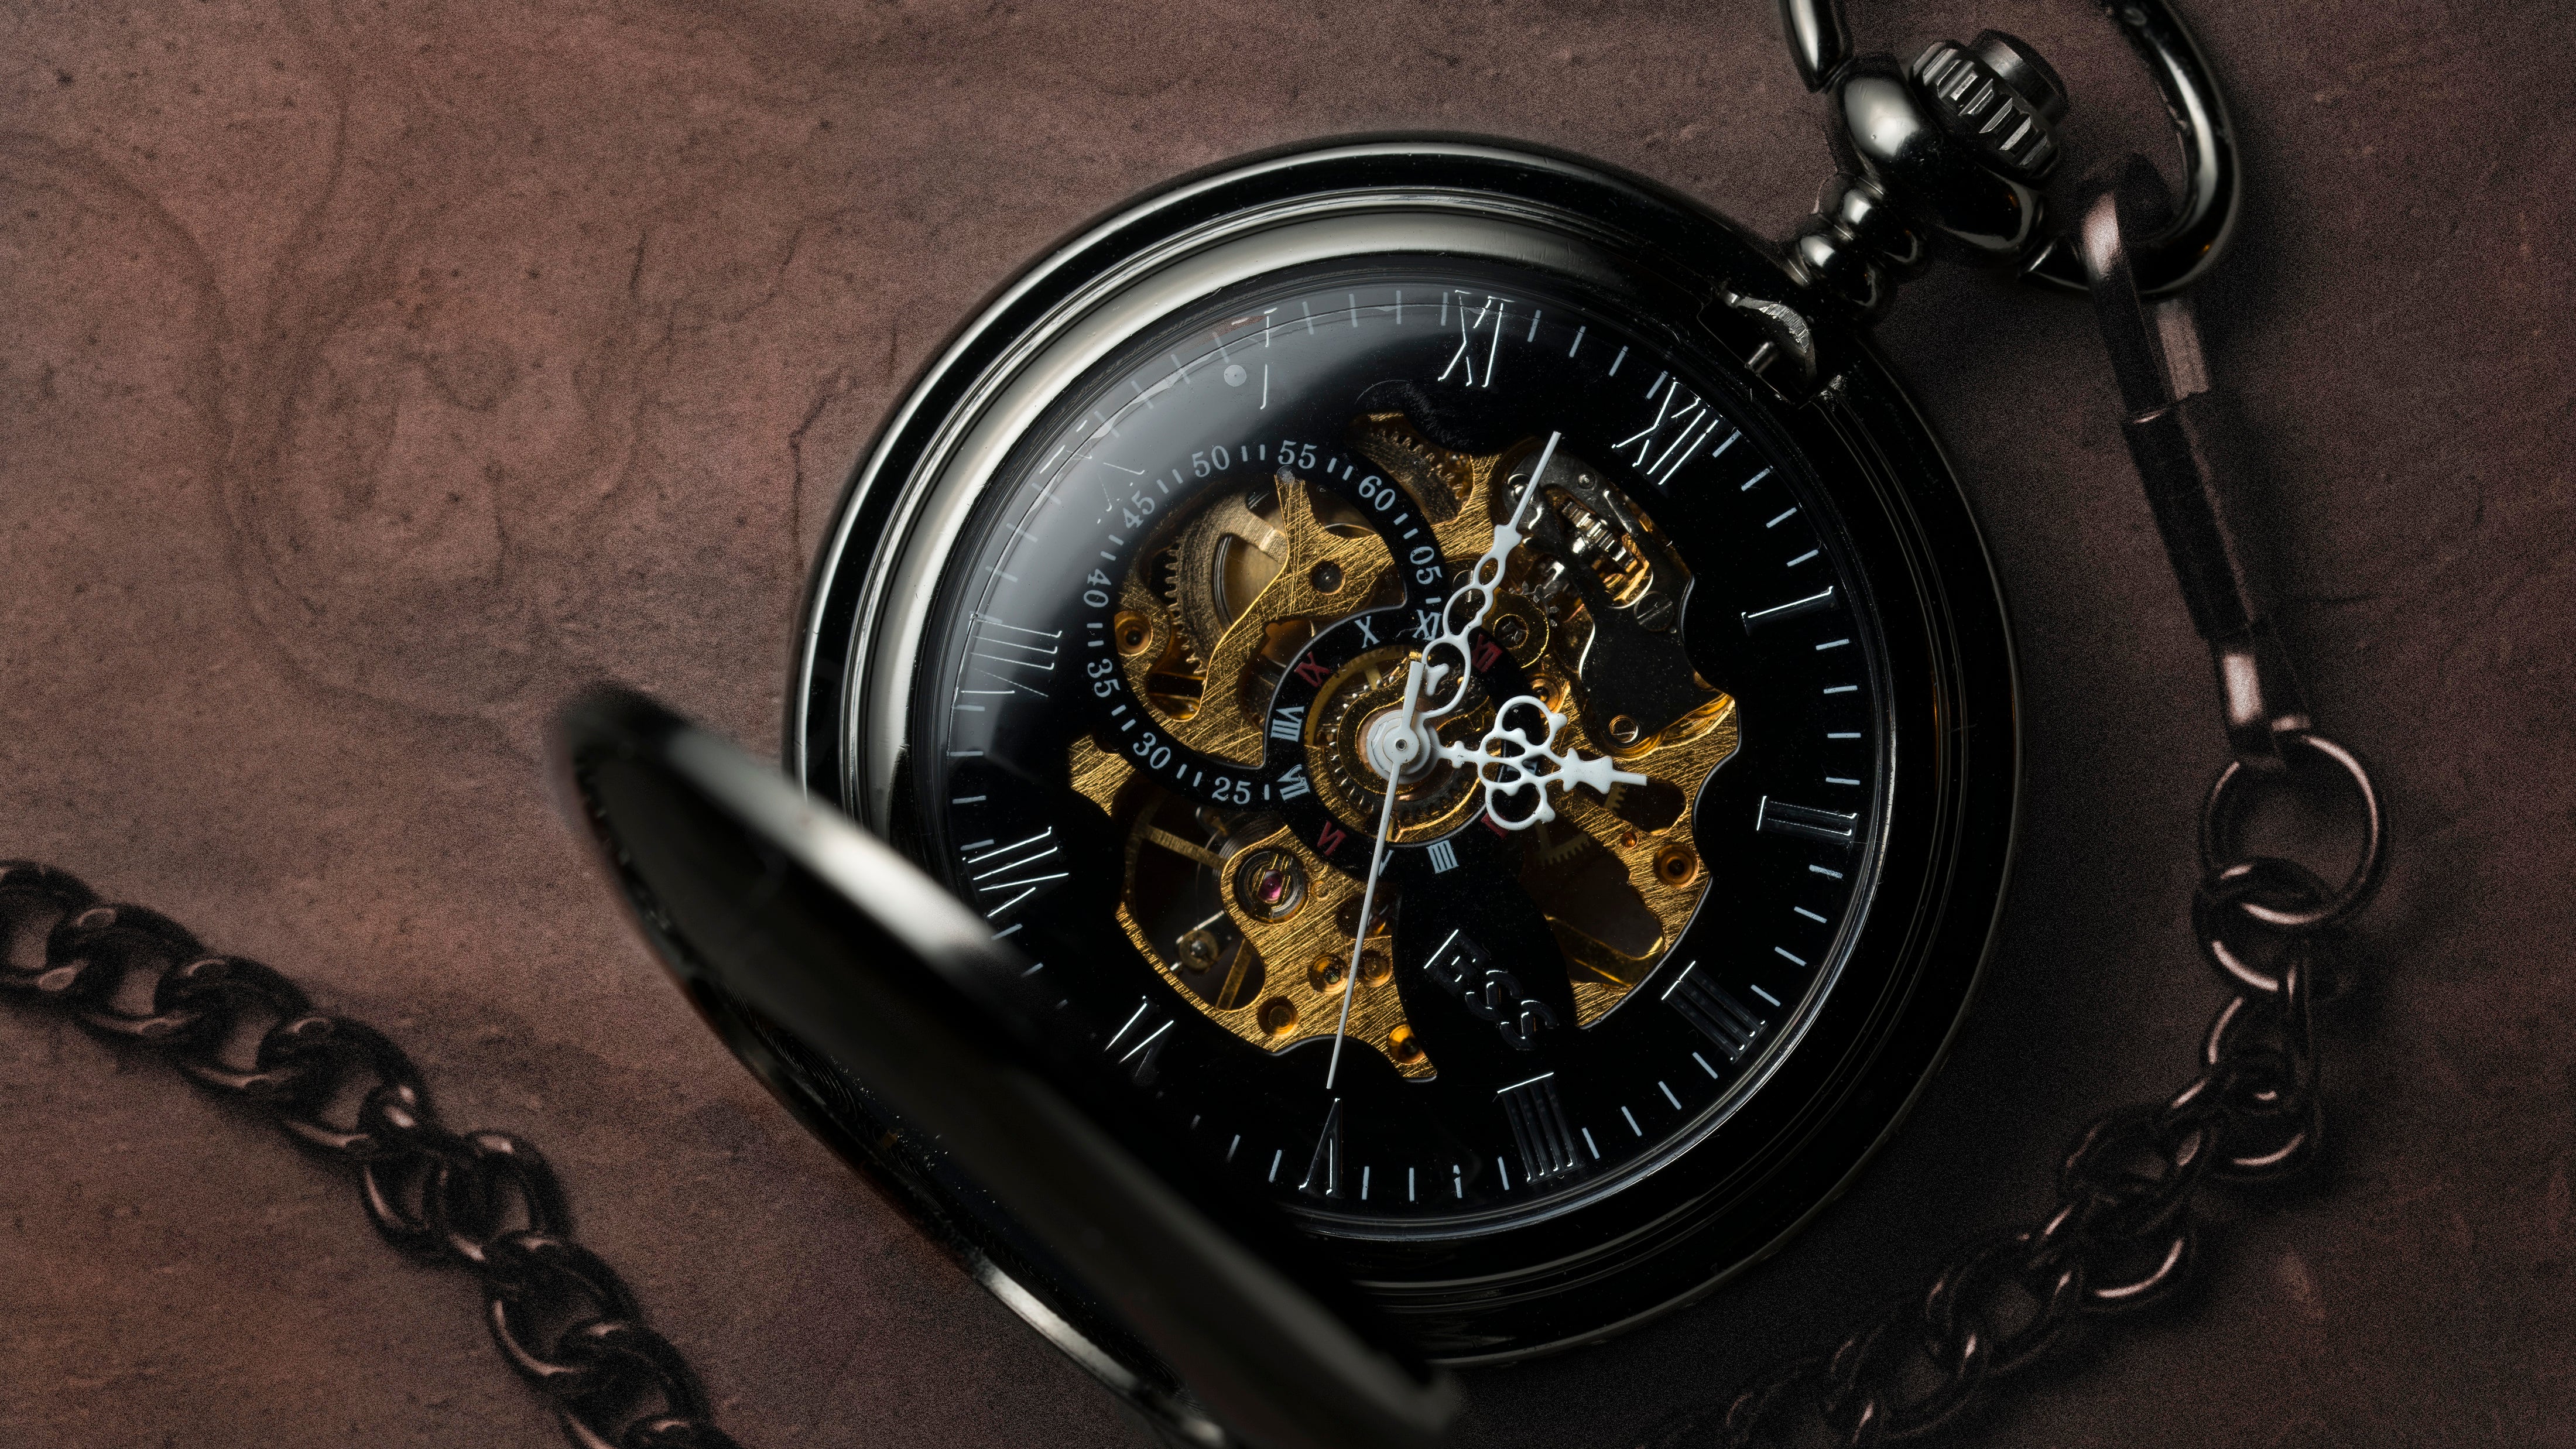 Pocket Watch With Sony A7R II and Sony 90mm Macro Lens